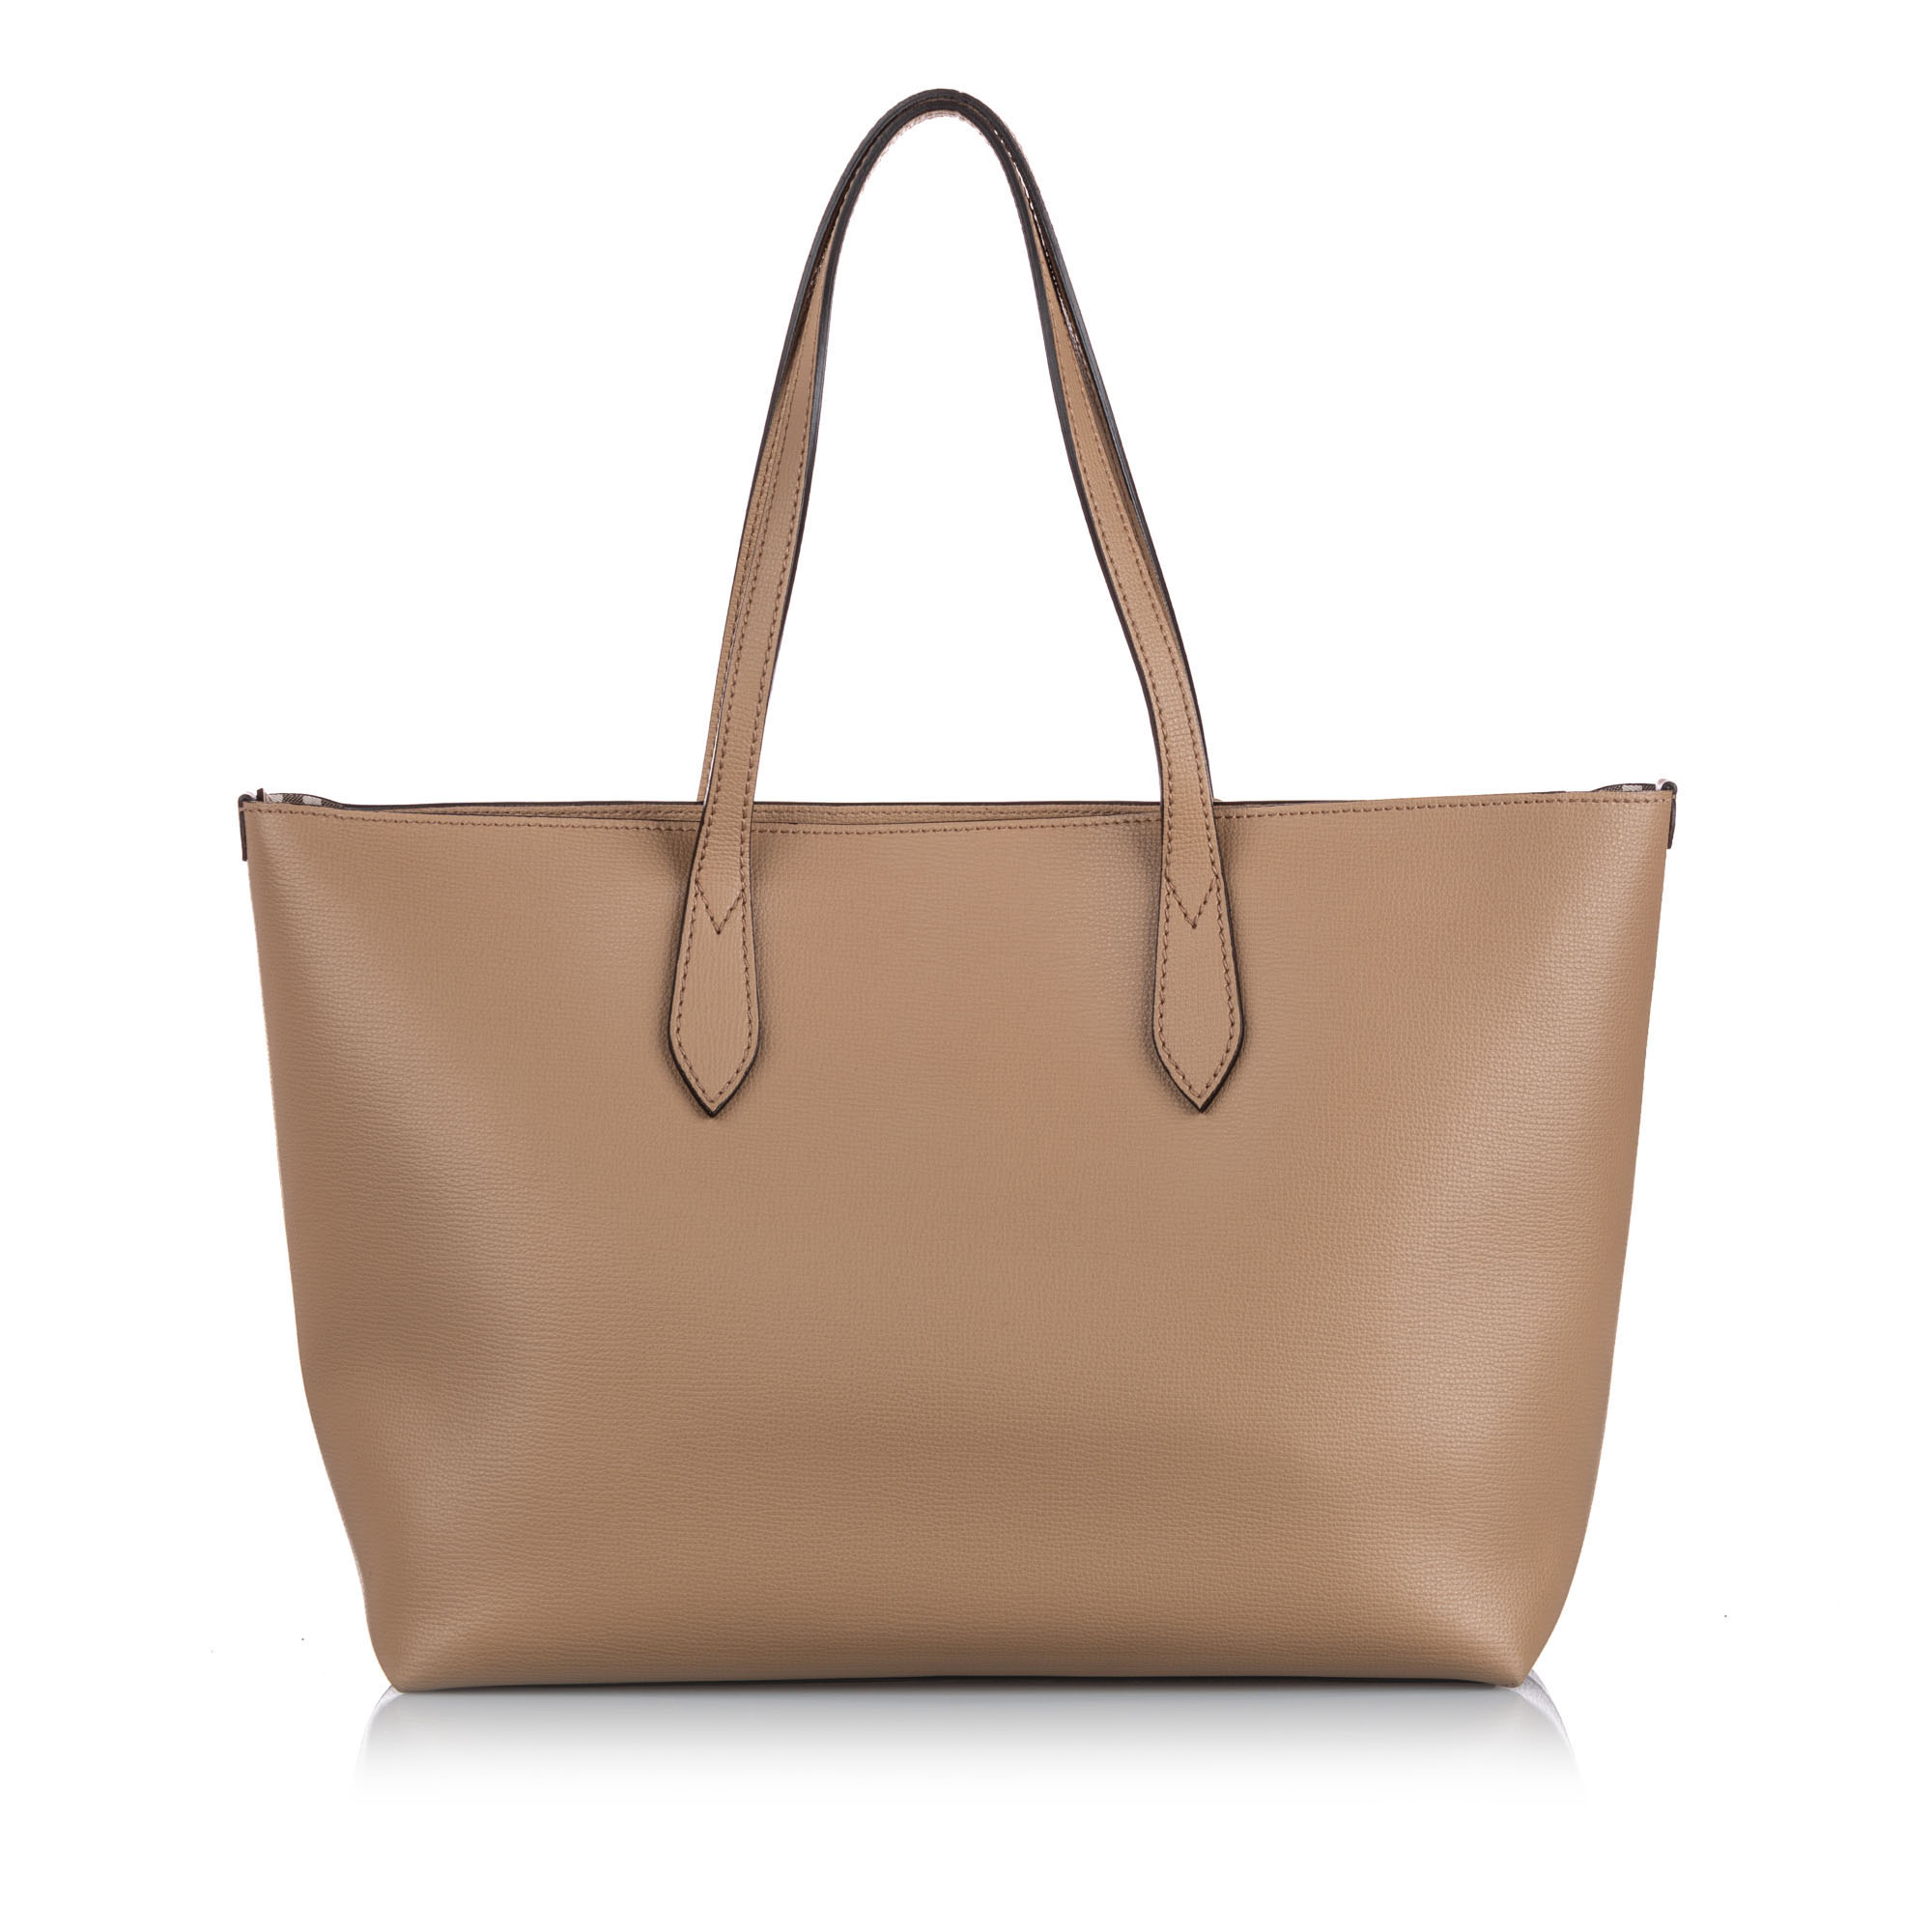 burberry brown leather tote